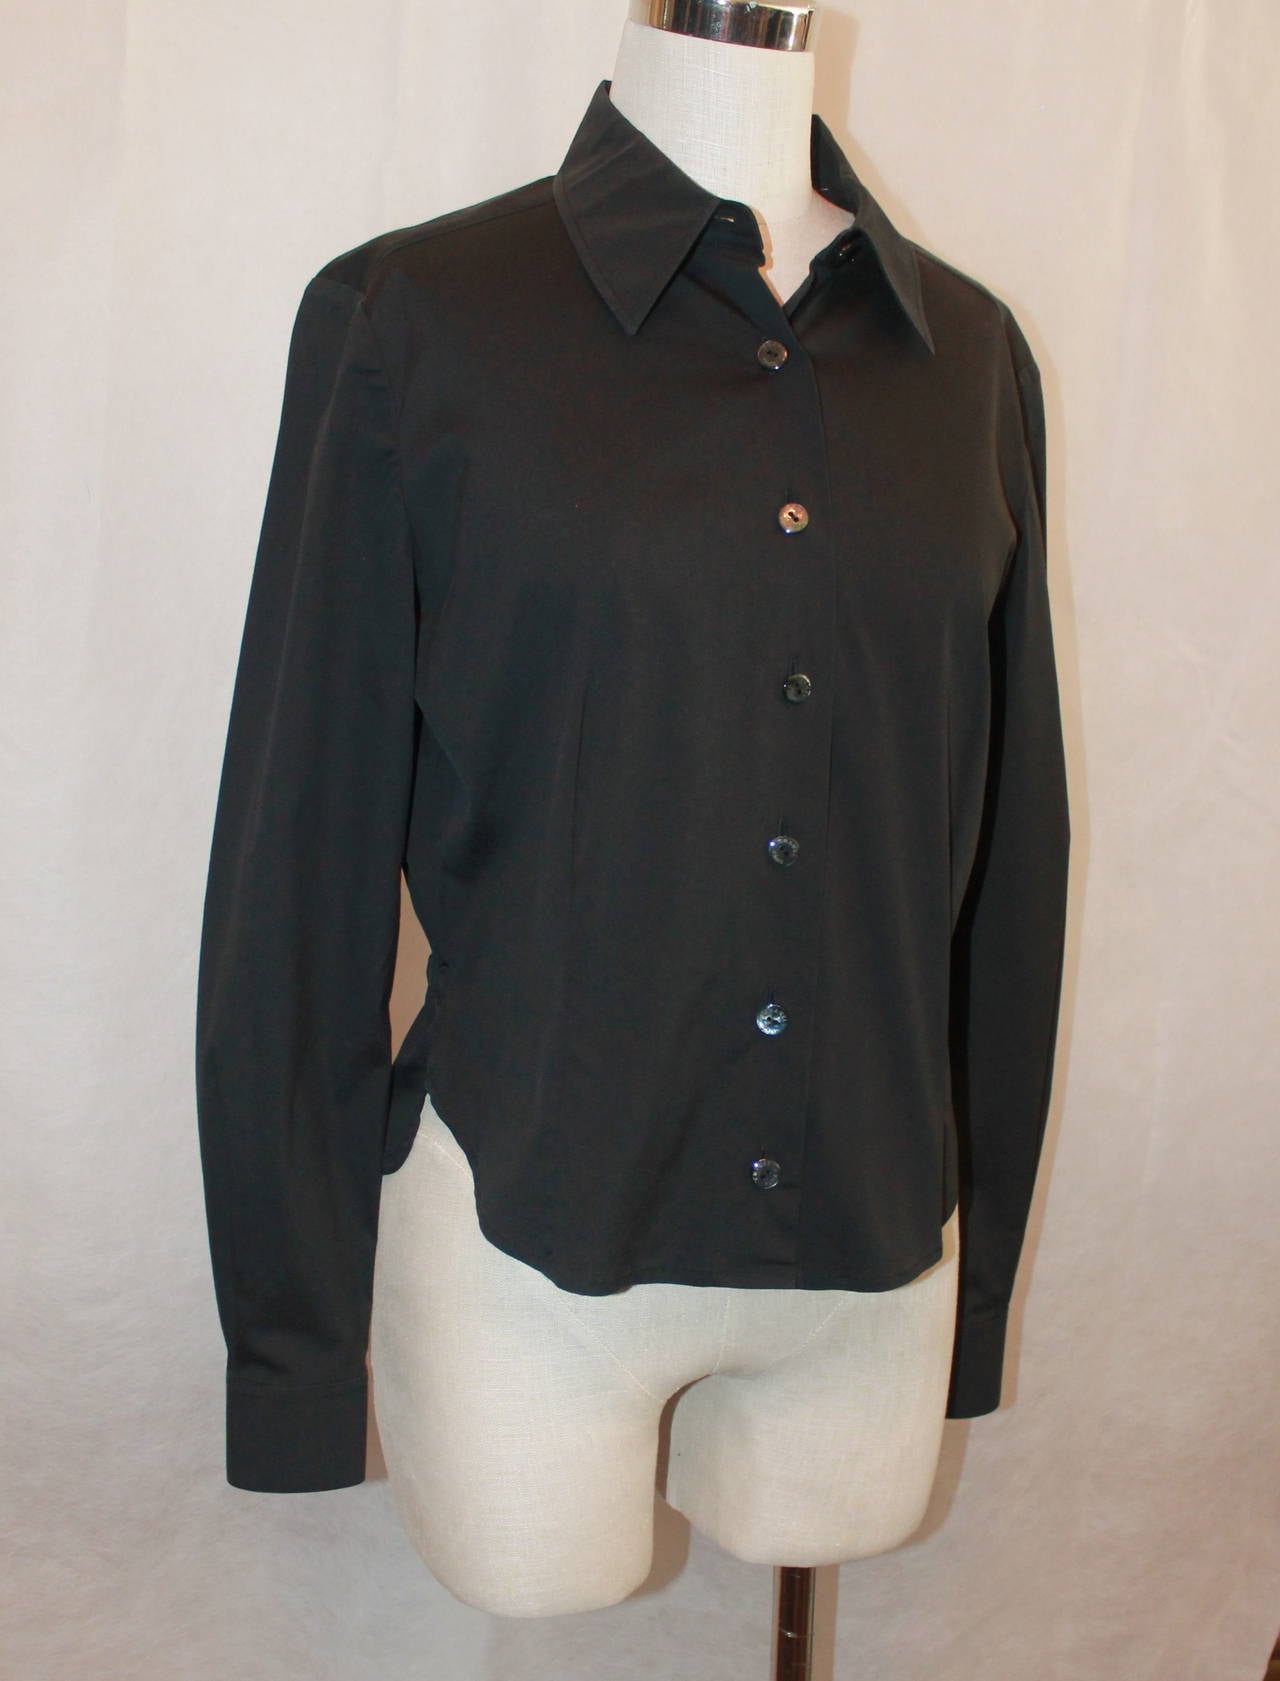 Chanel 1980's Vintage Black Cotton Collared Long Sleeve Blouse - 44. This blouse is in excellent condition and is fitted with an elastic band on the back. The buttons are black mother of pearl with the 